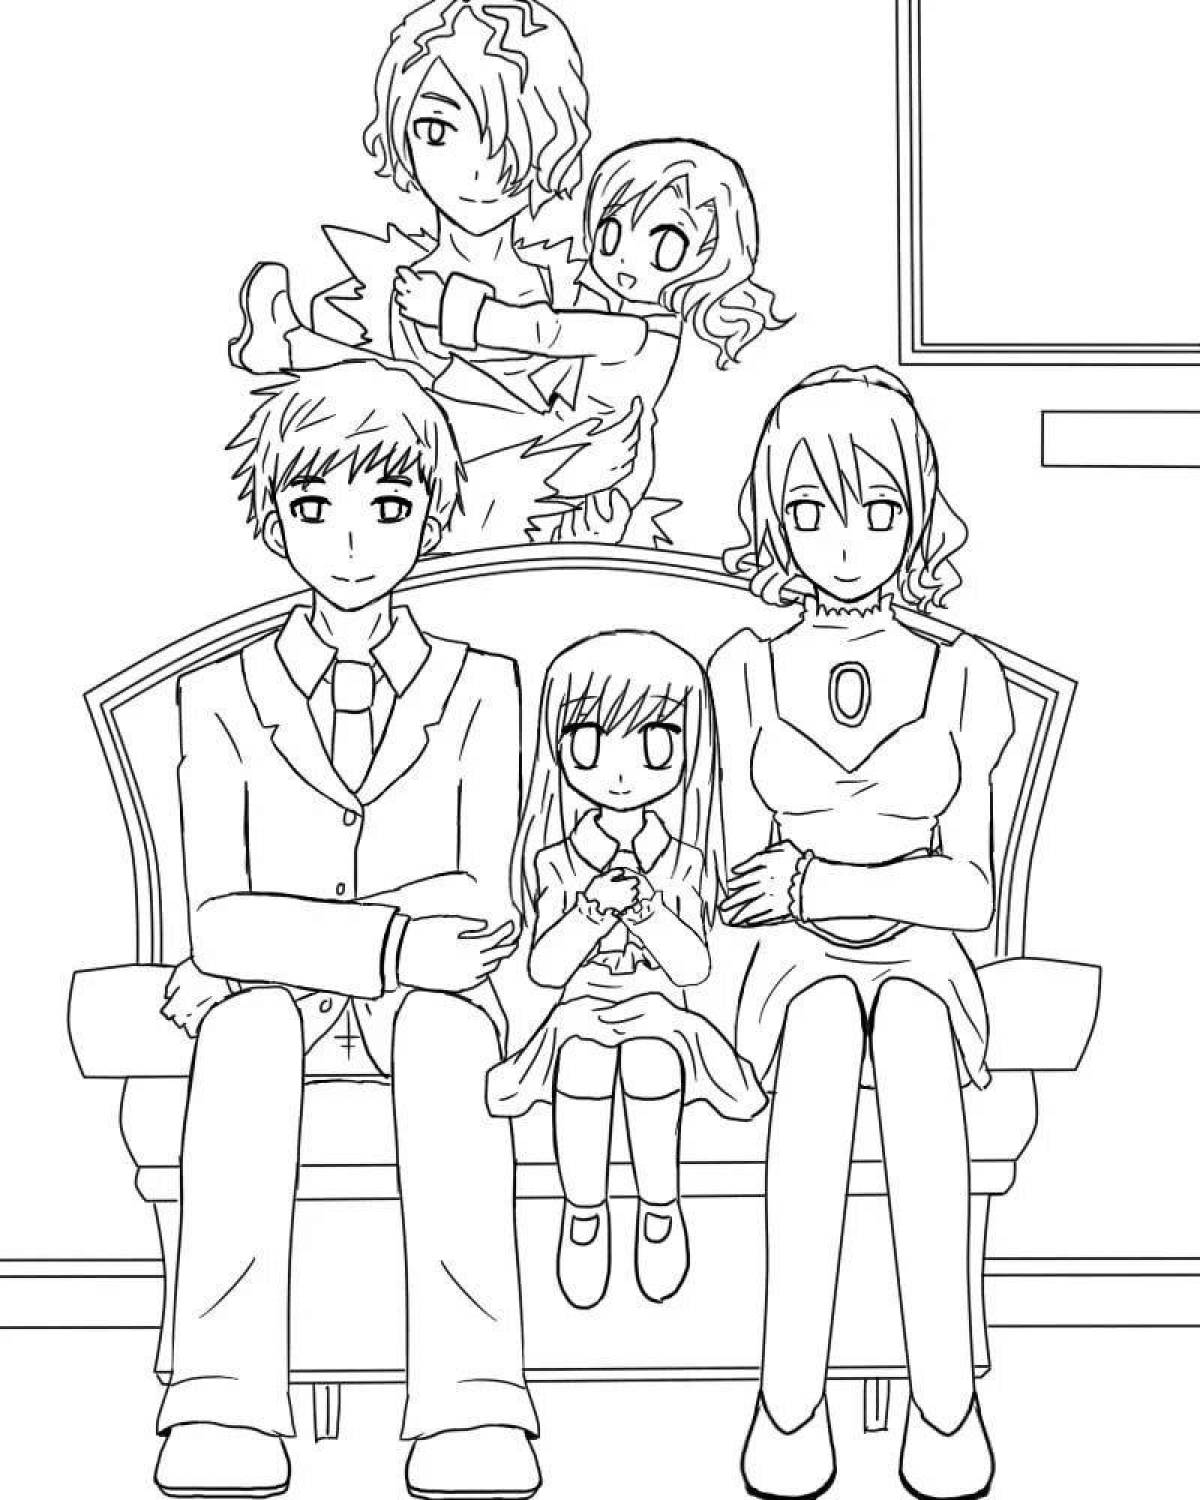 Incredible anime spy family coloring book